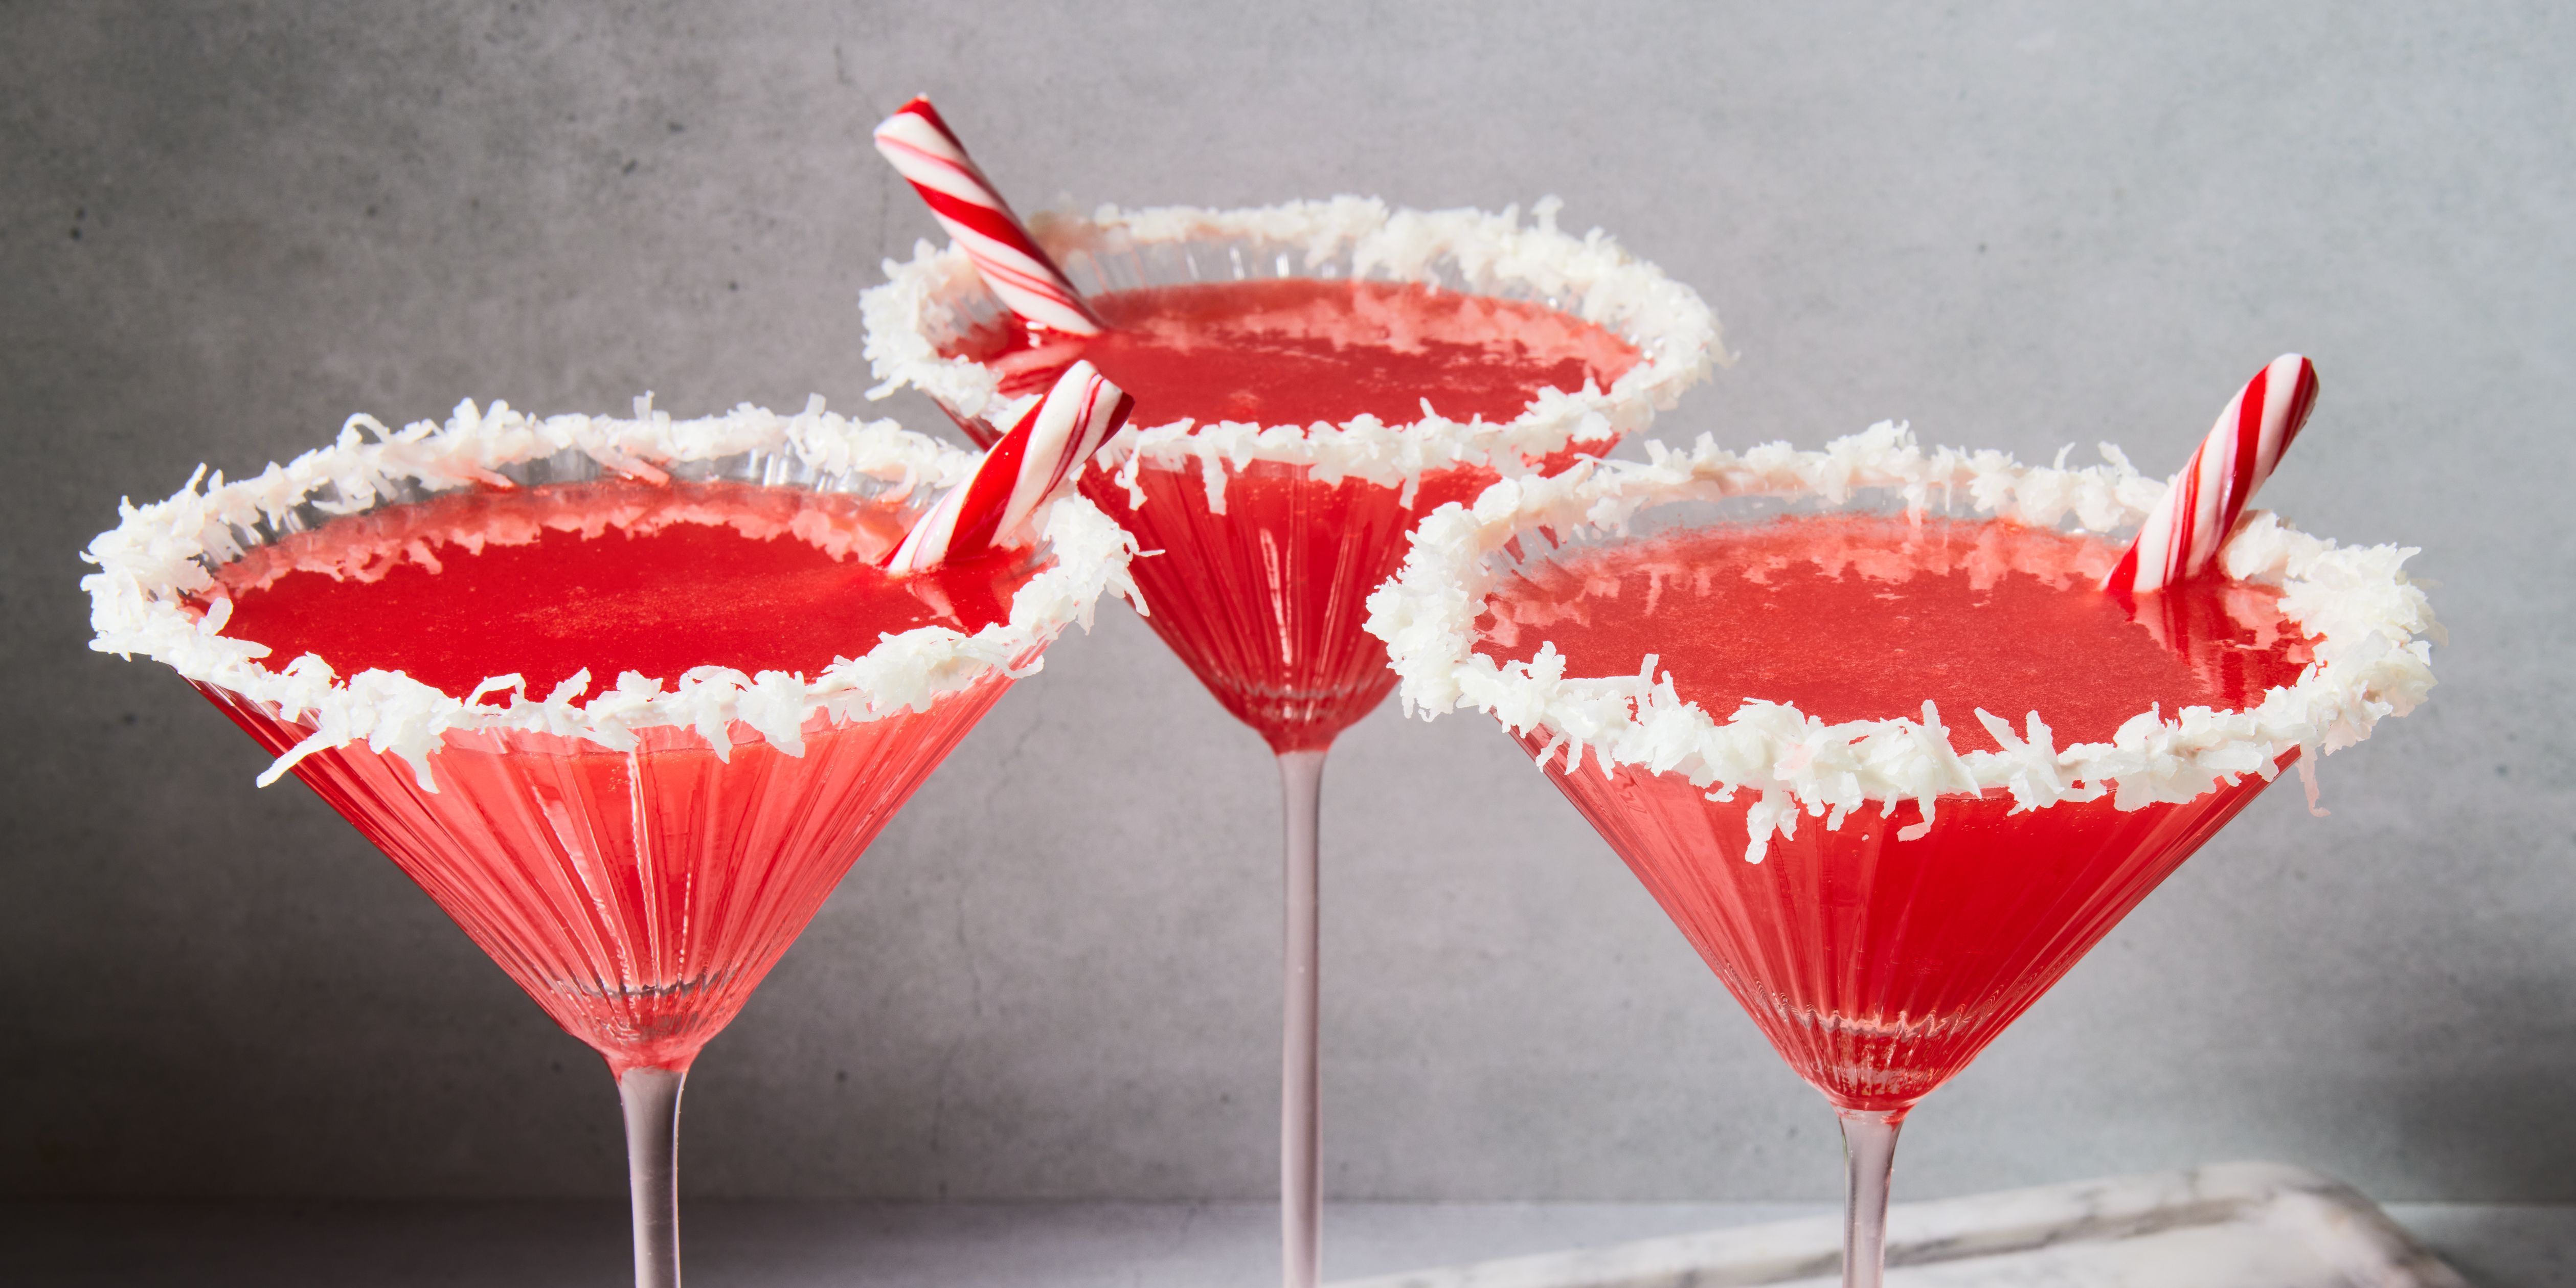 Cocktail mixers that'll make your house party an instant hit